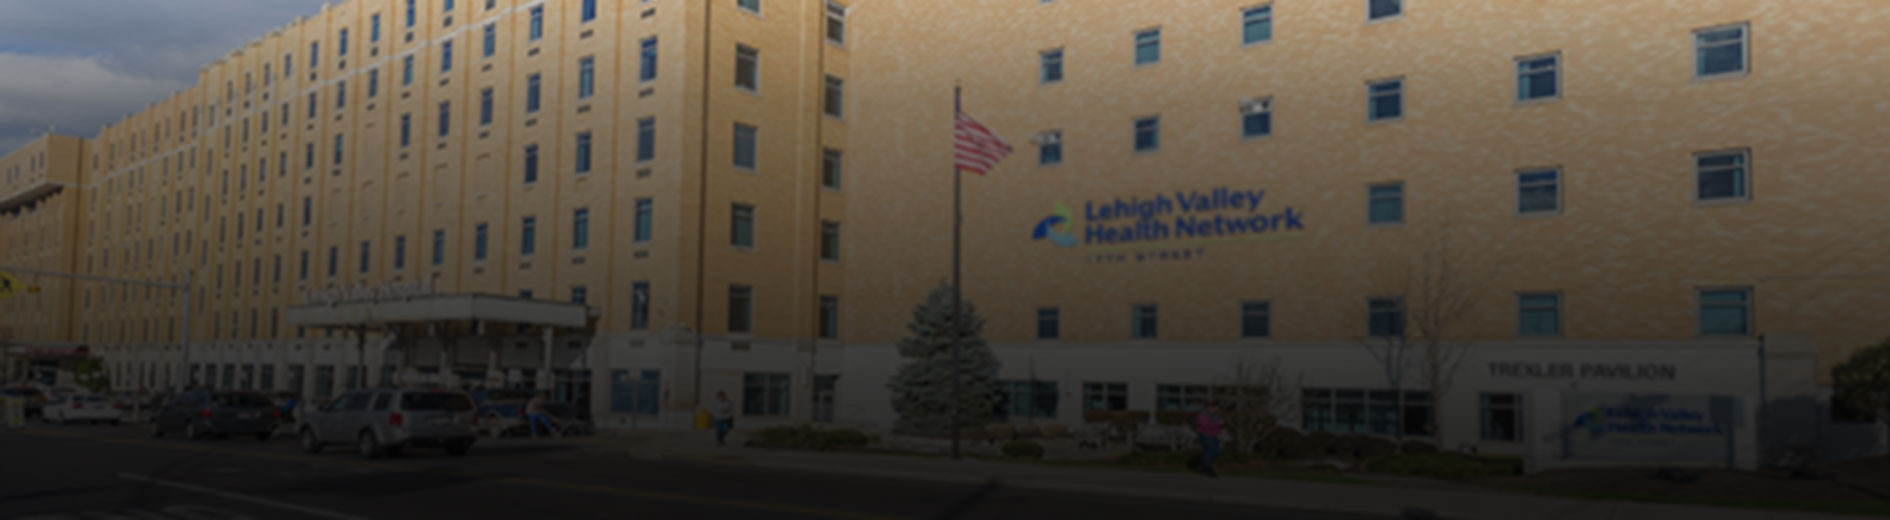 The Lehigh Valley Health Children's Clinic in Allentown, PA.